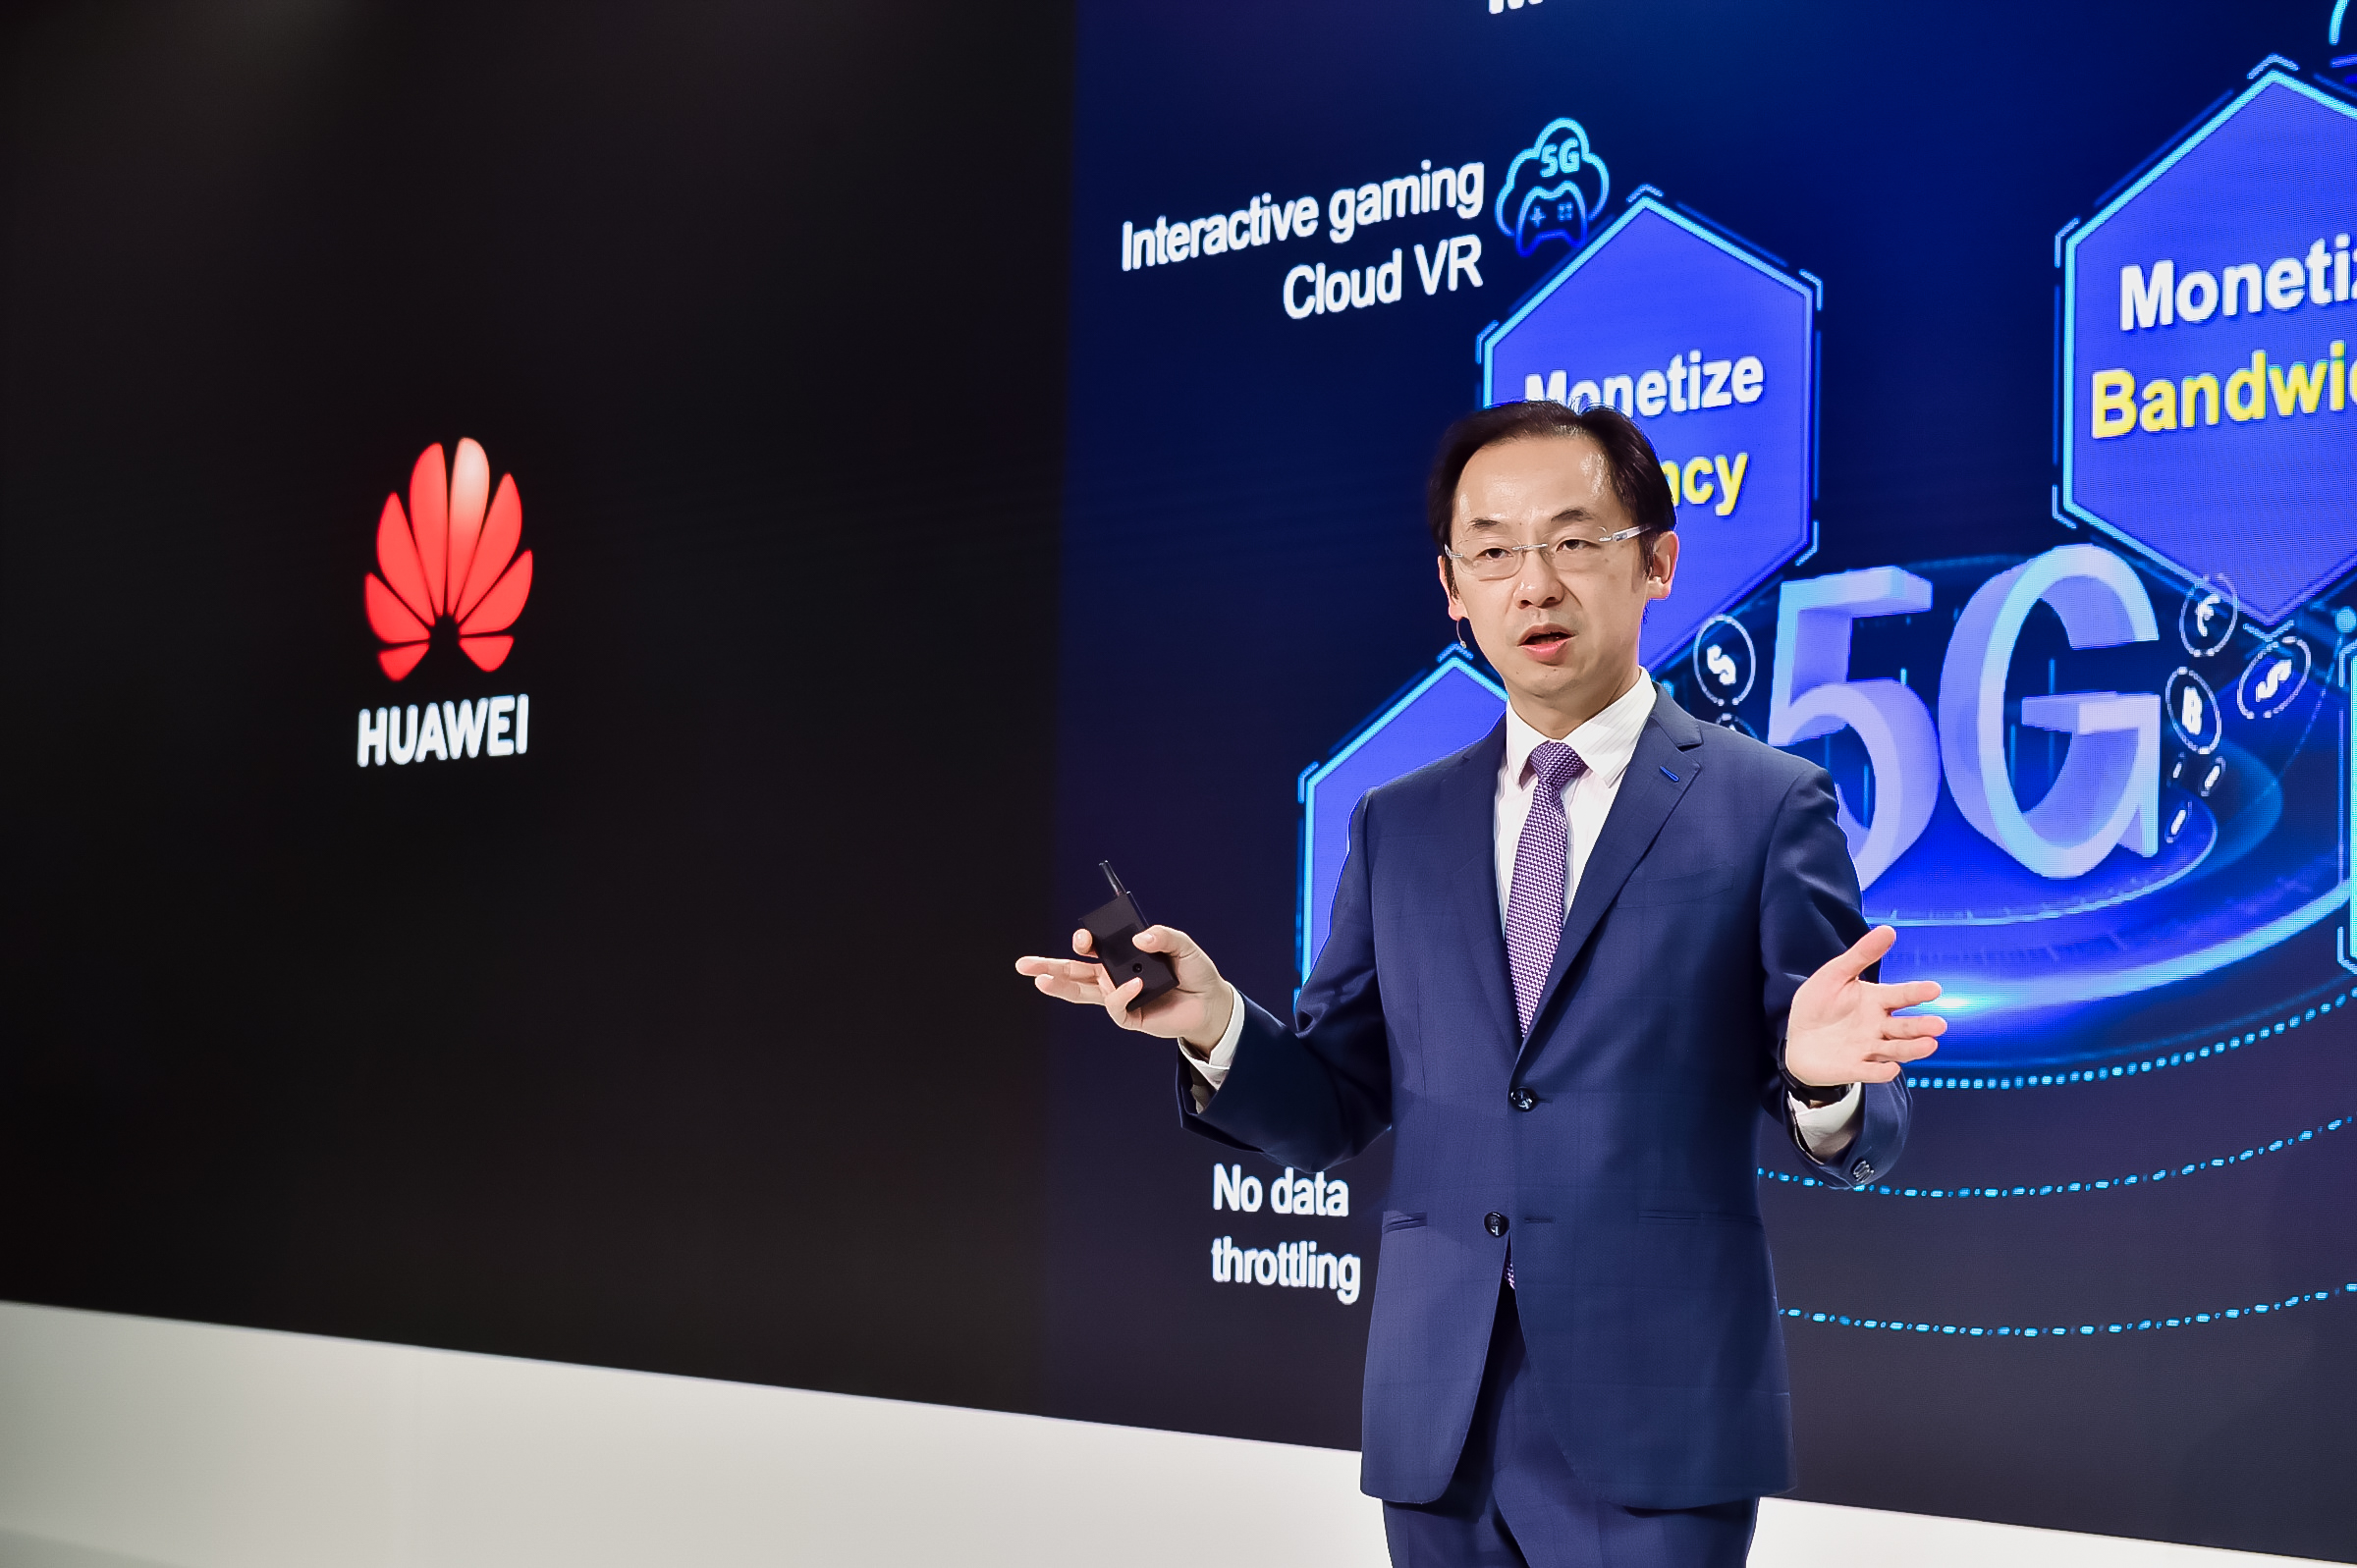 Huawei Releases New 5G Products and Solutions, Poised to Bring New Value